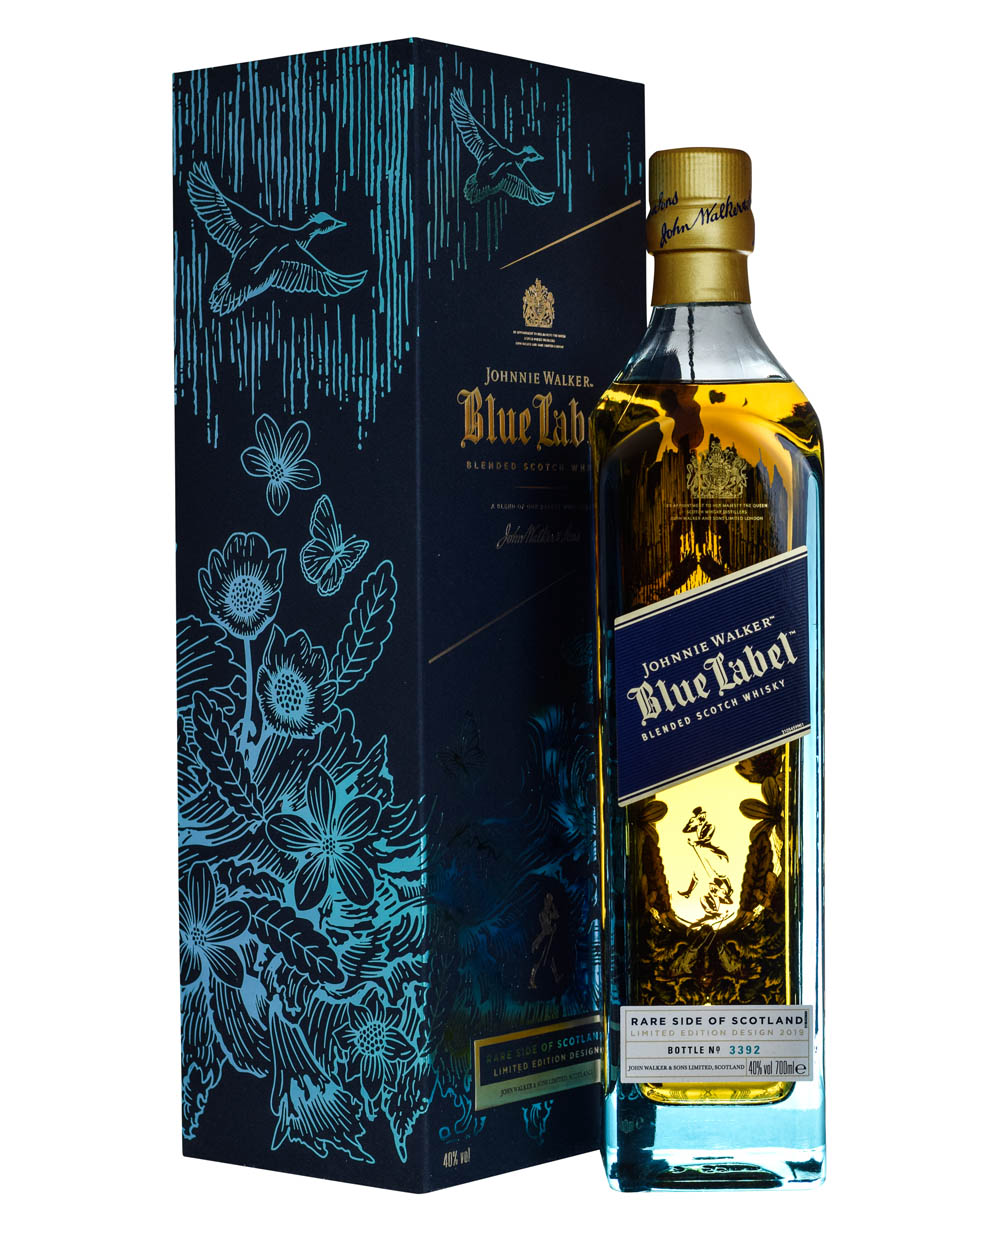 Johnnie Walker Blue Label Rare Side Of Scotland Box Musthave Malts MHM